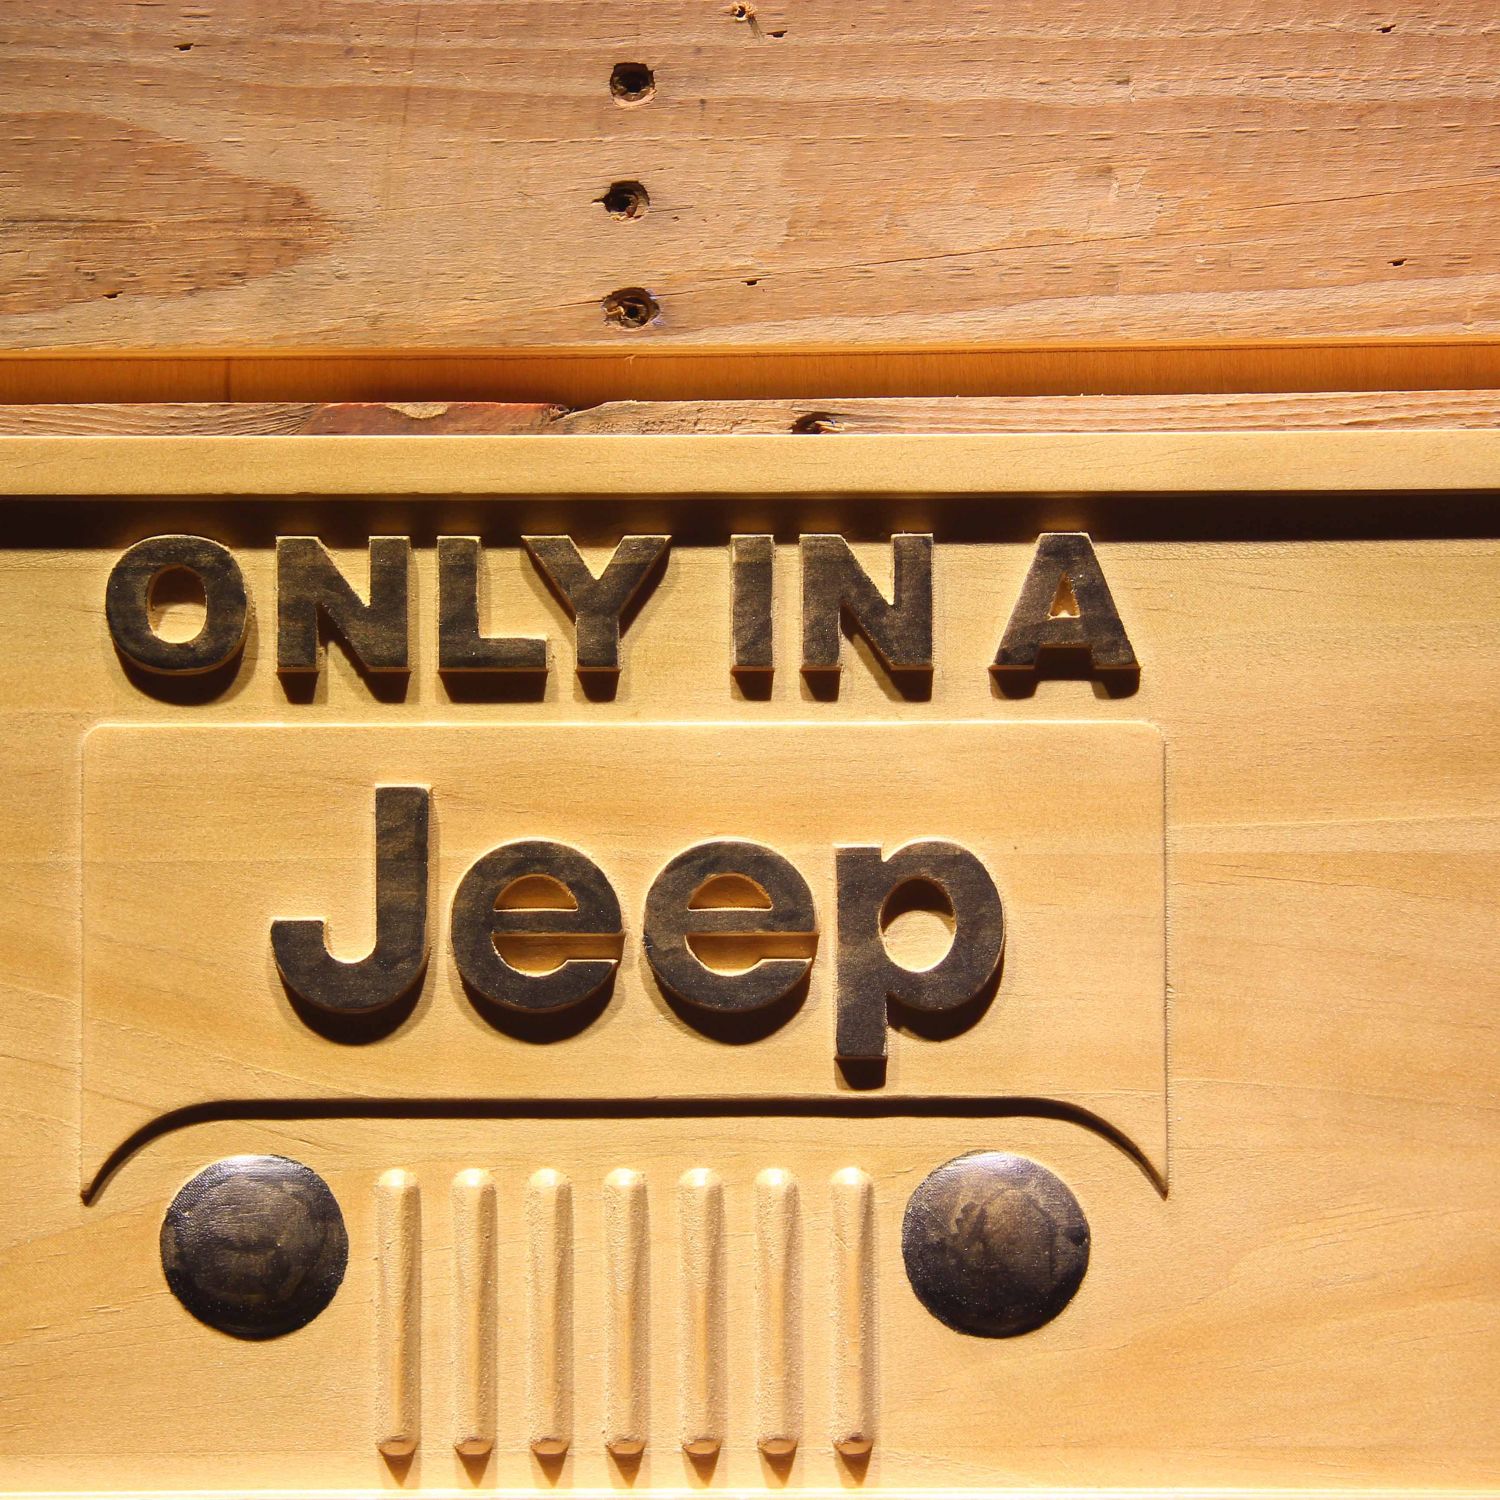 Jeep Only in A Jeep Wood Sign - neon sign - LED sign - shop - What's ...